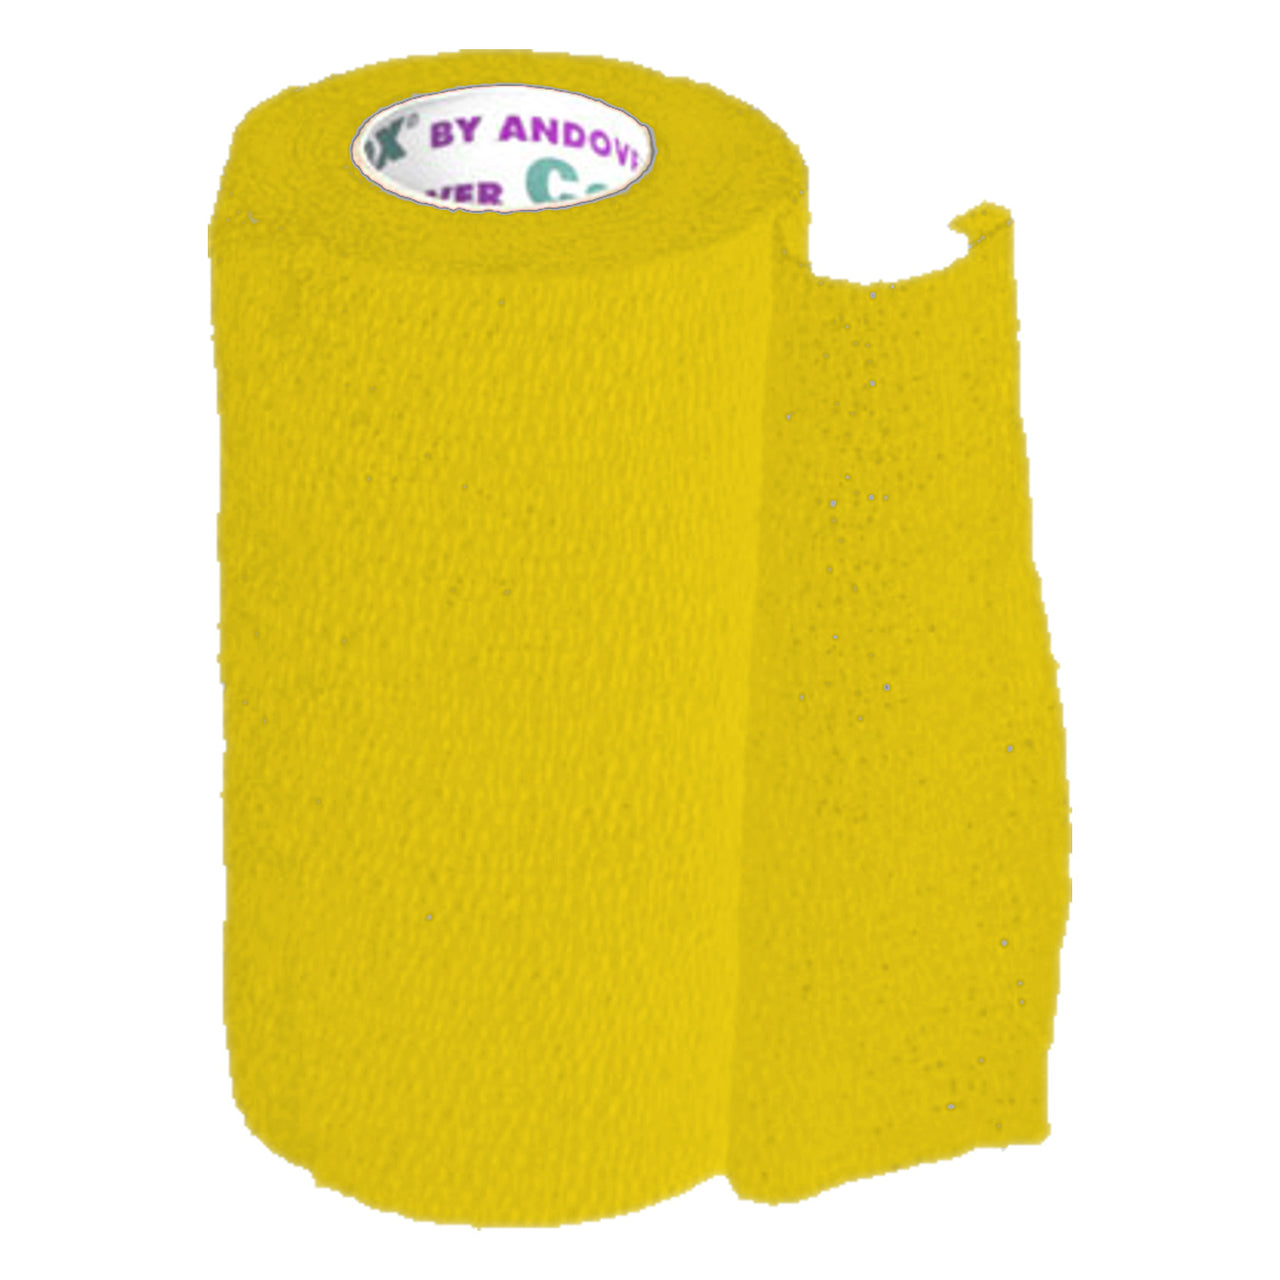 Andover Coflexvet 4X 15 Bandage (Yellow) - Wound Dressing Andover - Canada